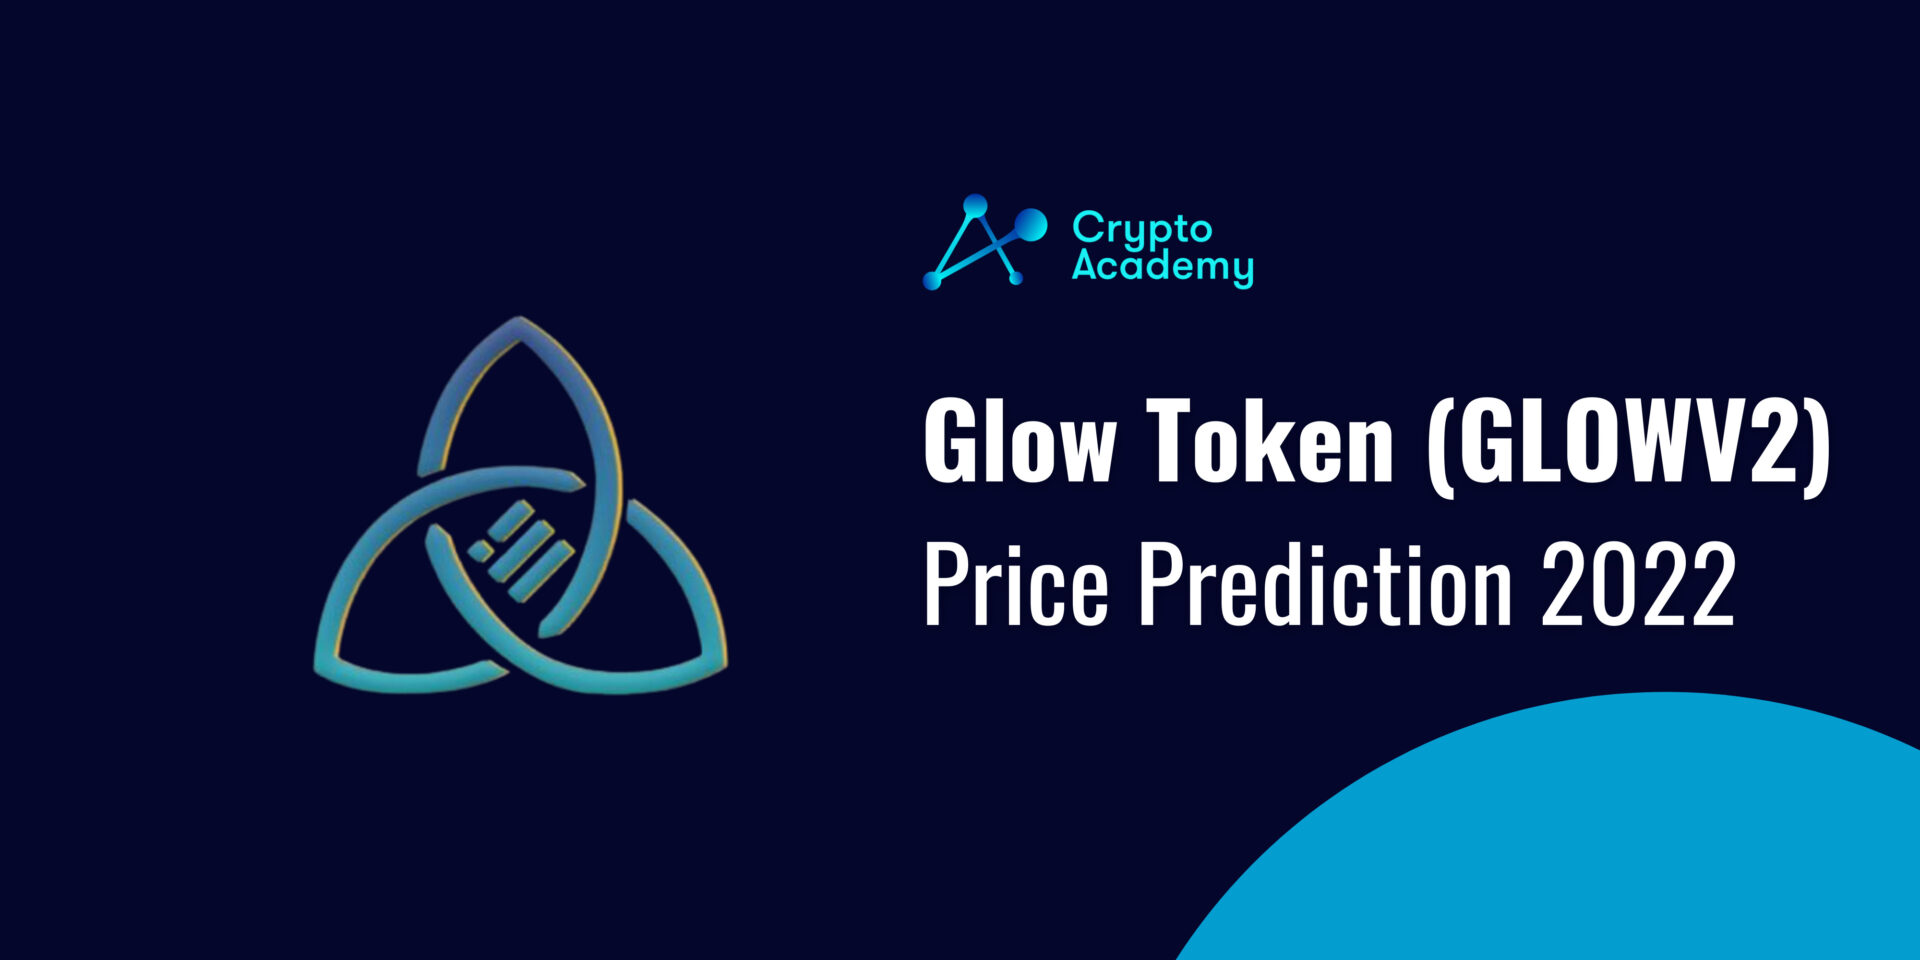 Glow Token Price Prediction 2022 and Beyond - Will GLOWV2 Potentially Reach $1?